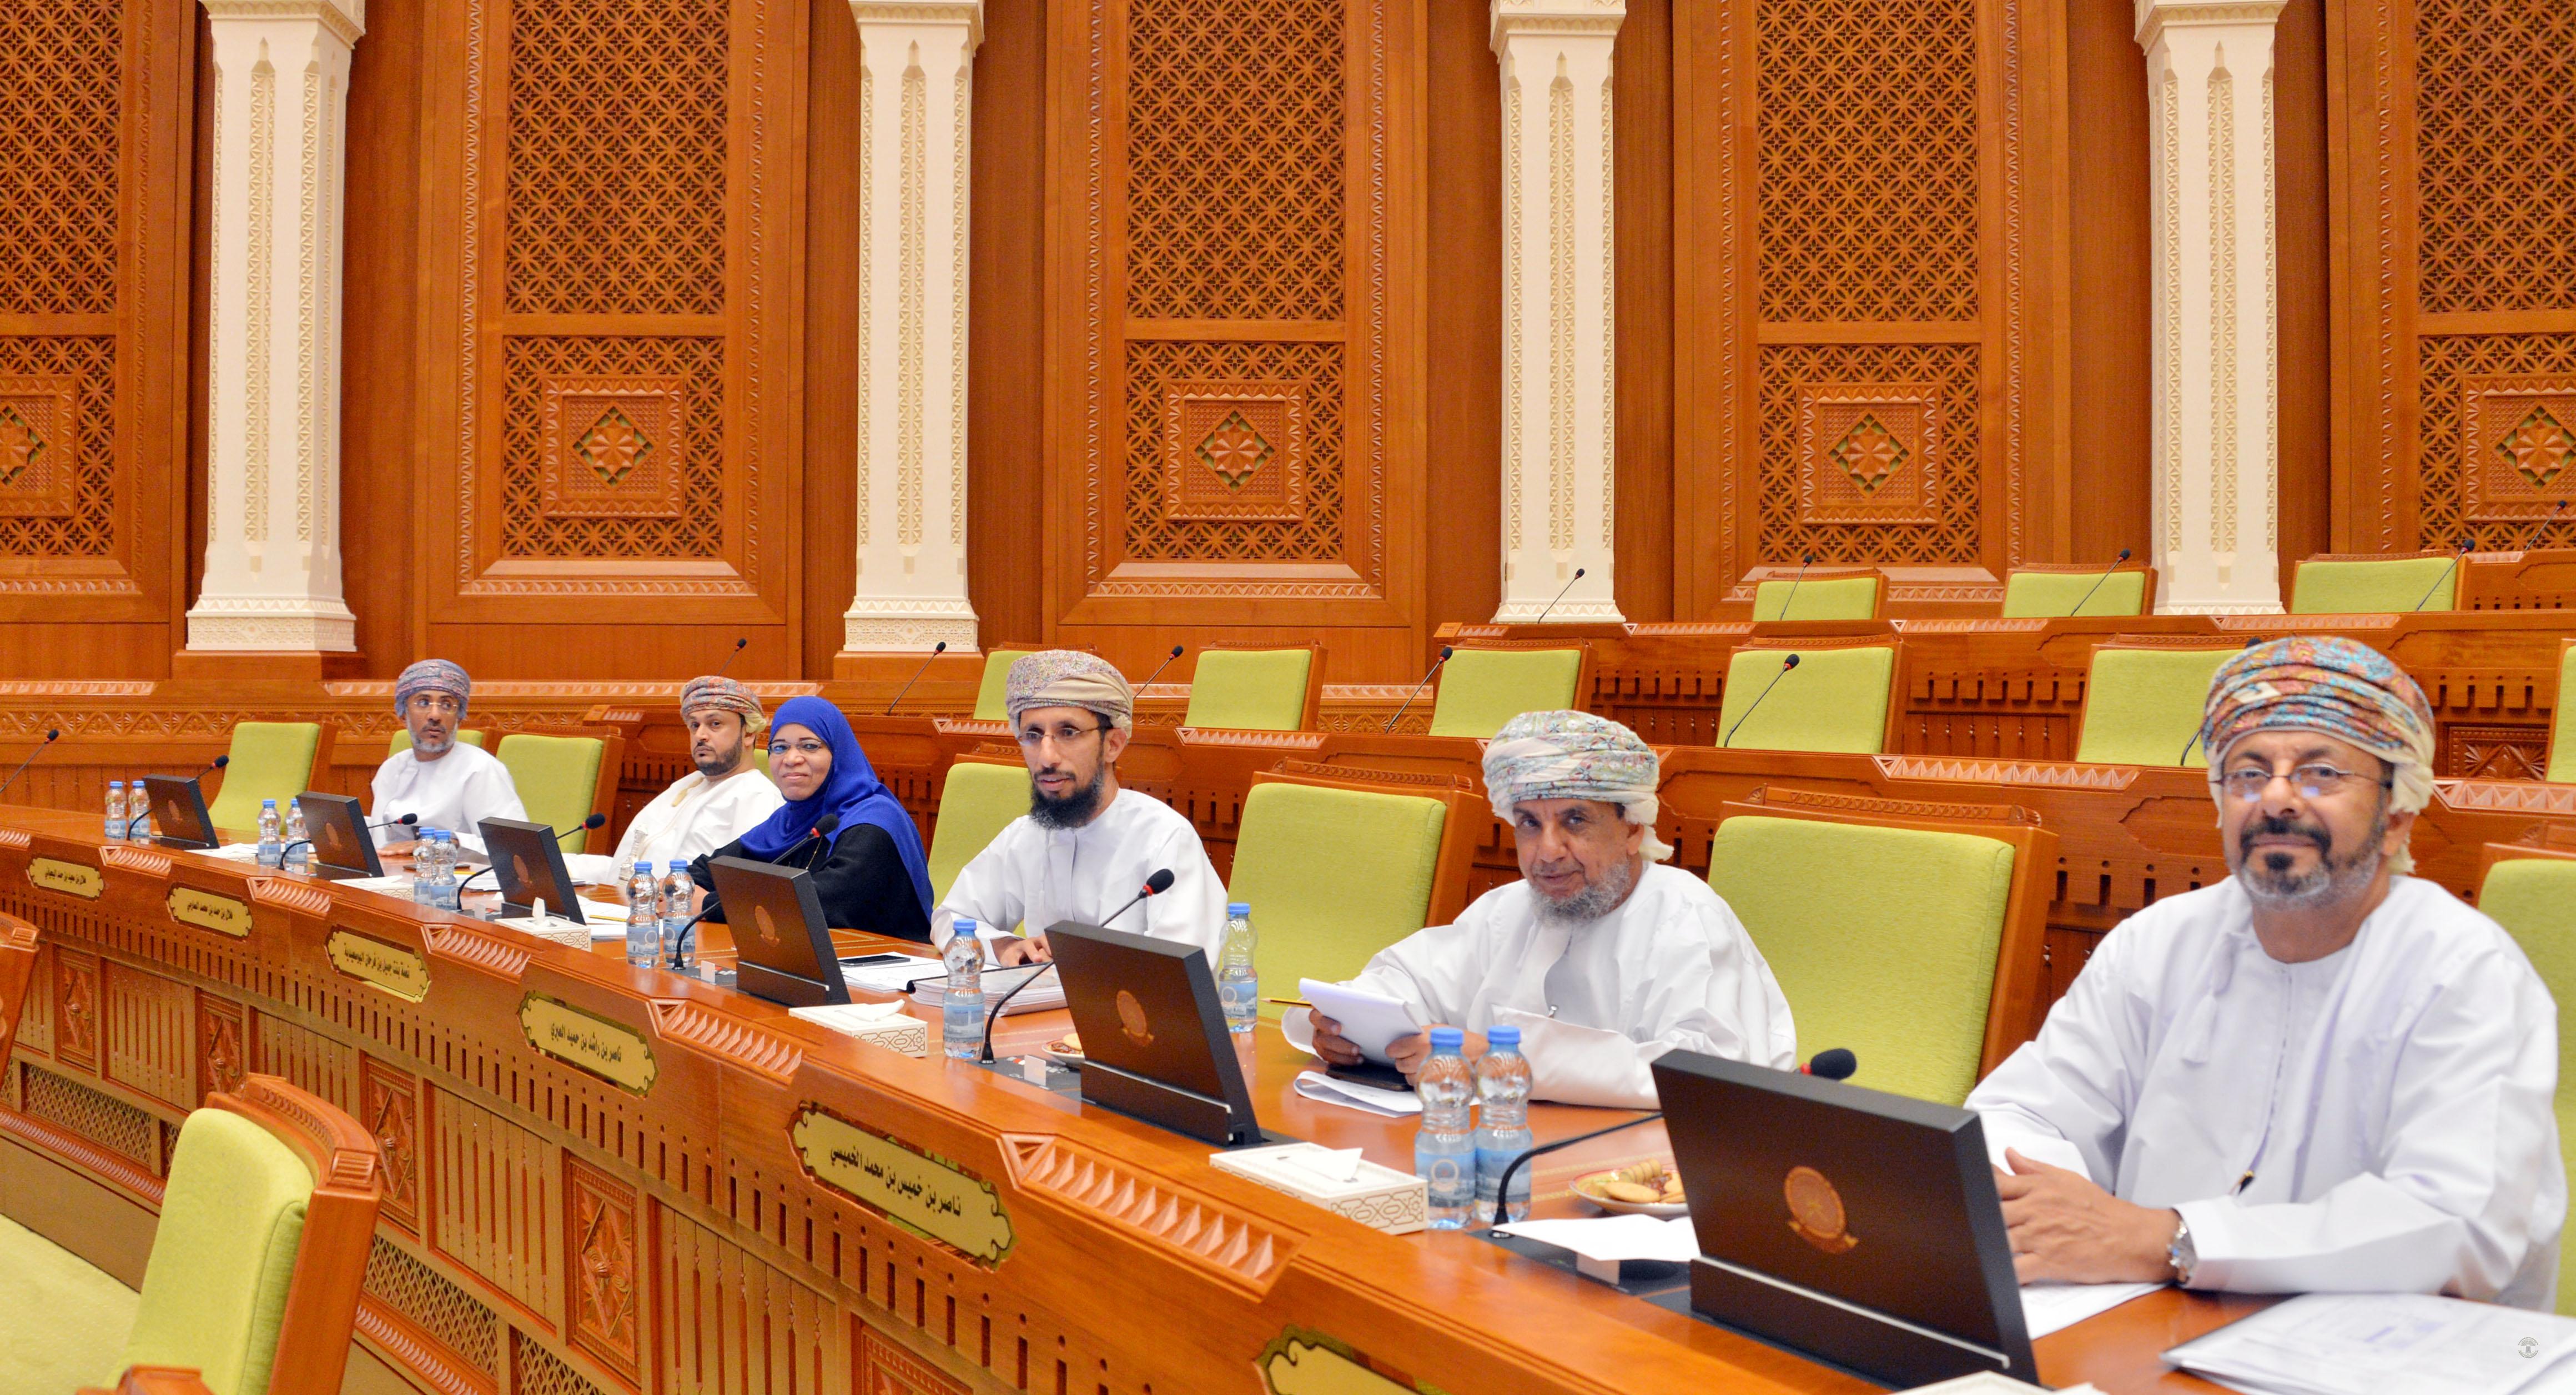 Shura members submit proposal to build sports complex in Oman